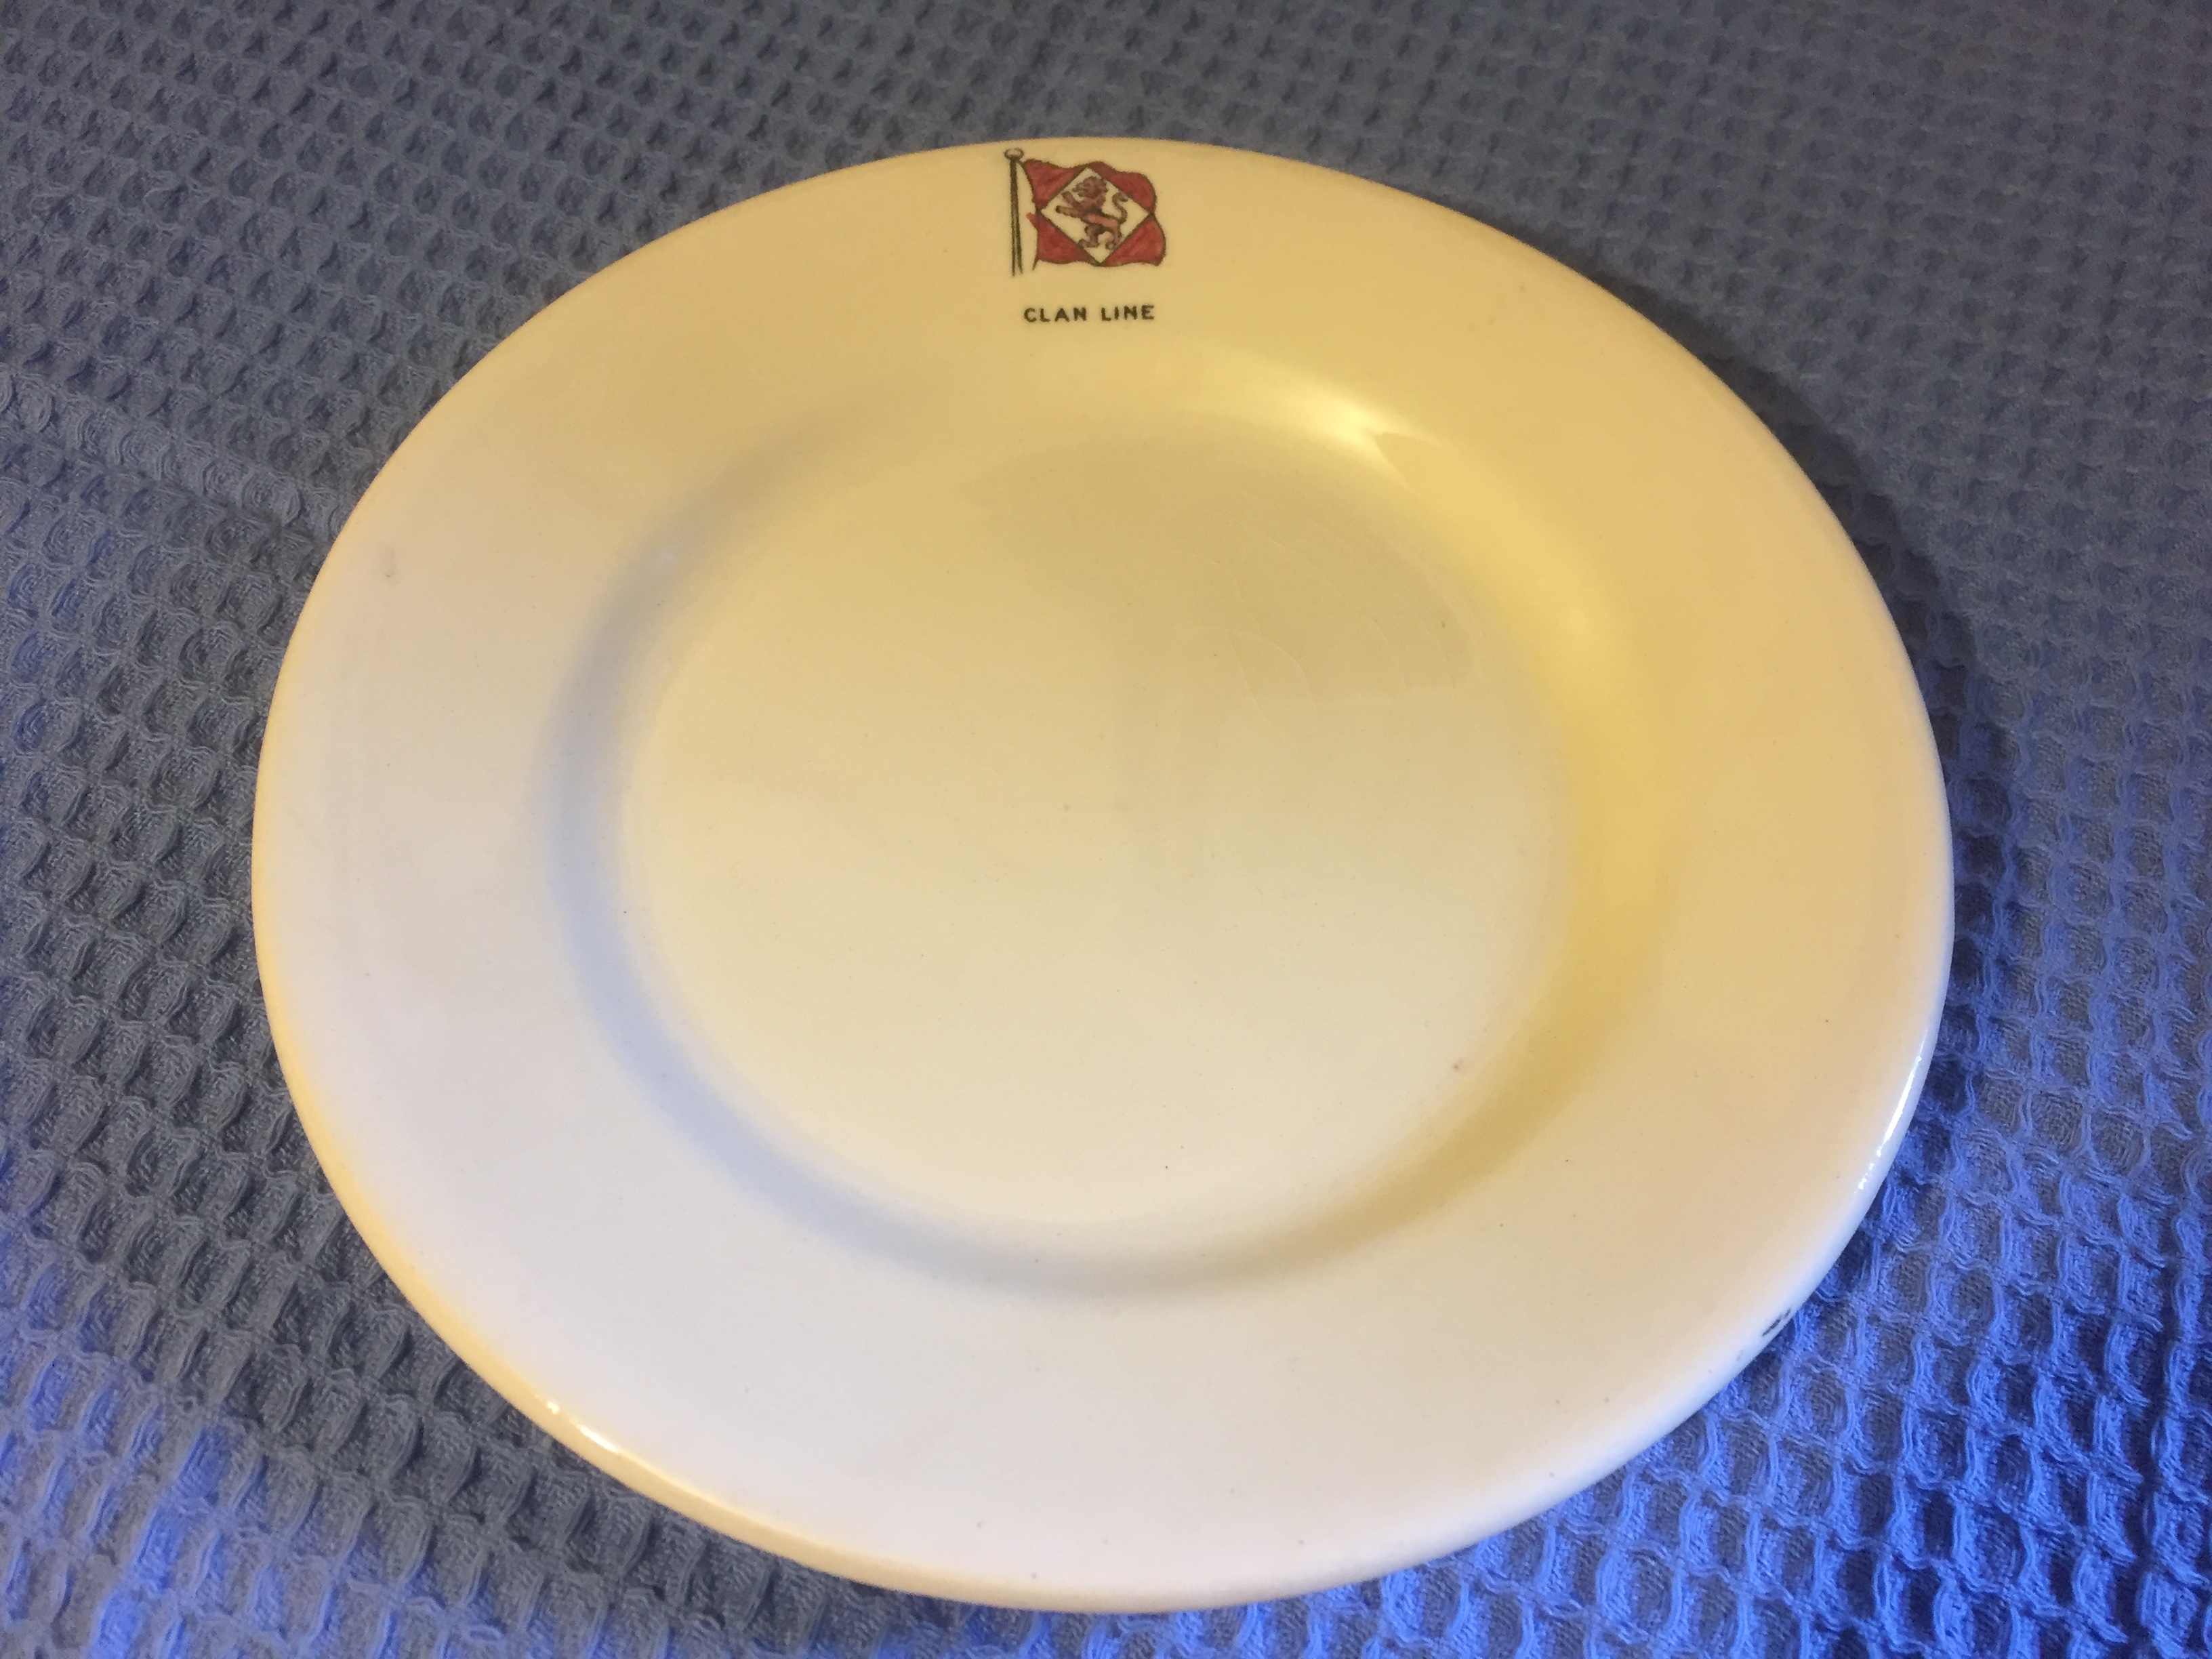 RARE DINING PLATE FROM THE CLAN LINE SHIPPING COMPANY